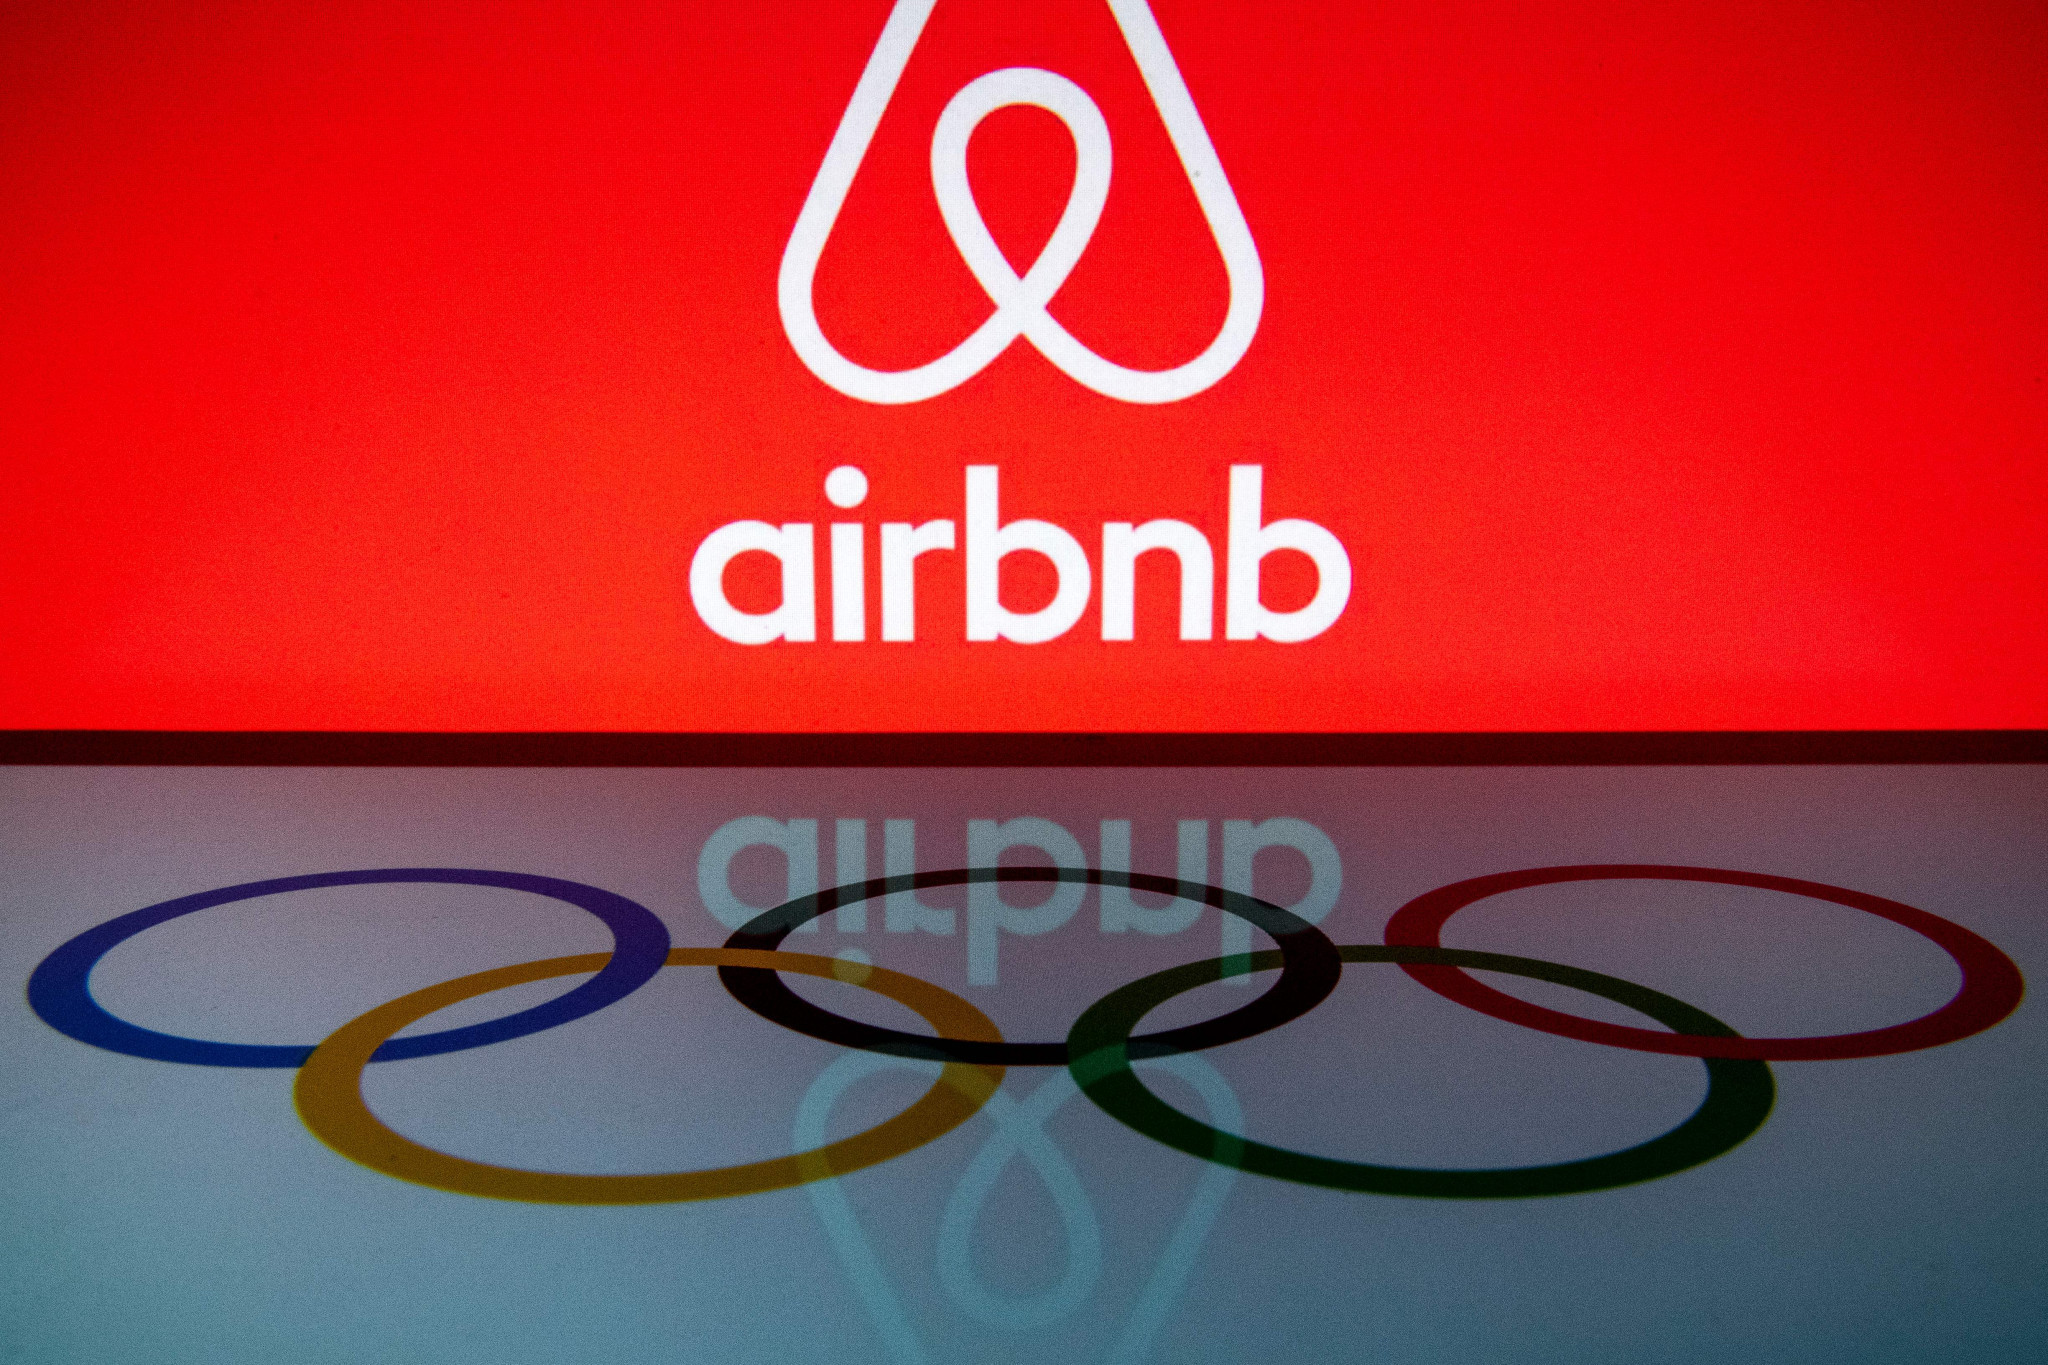 Airbnb is one of the US-based sponsors of the IOC asked to take part in a "Corporate Sponsorship of the 2022 Winter Olympics" hearing ©Getty Images